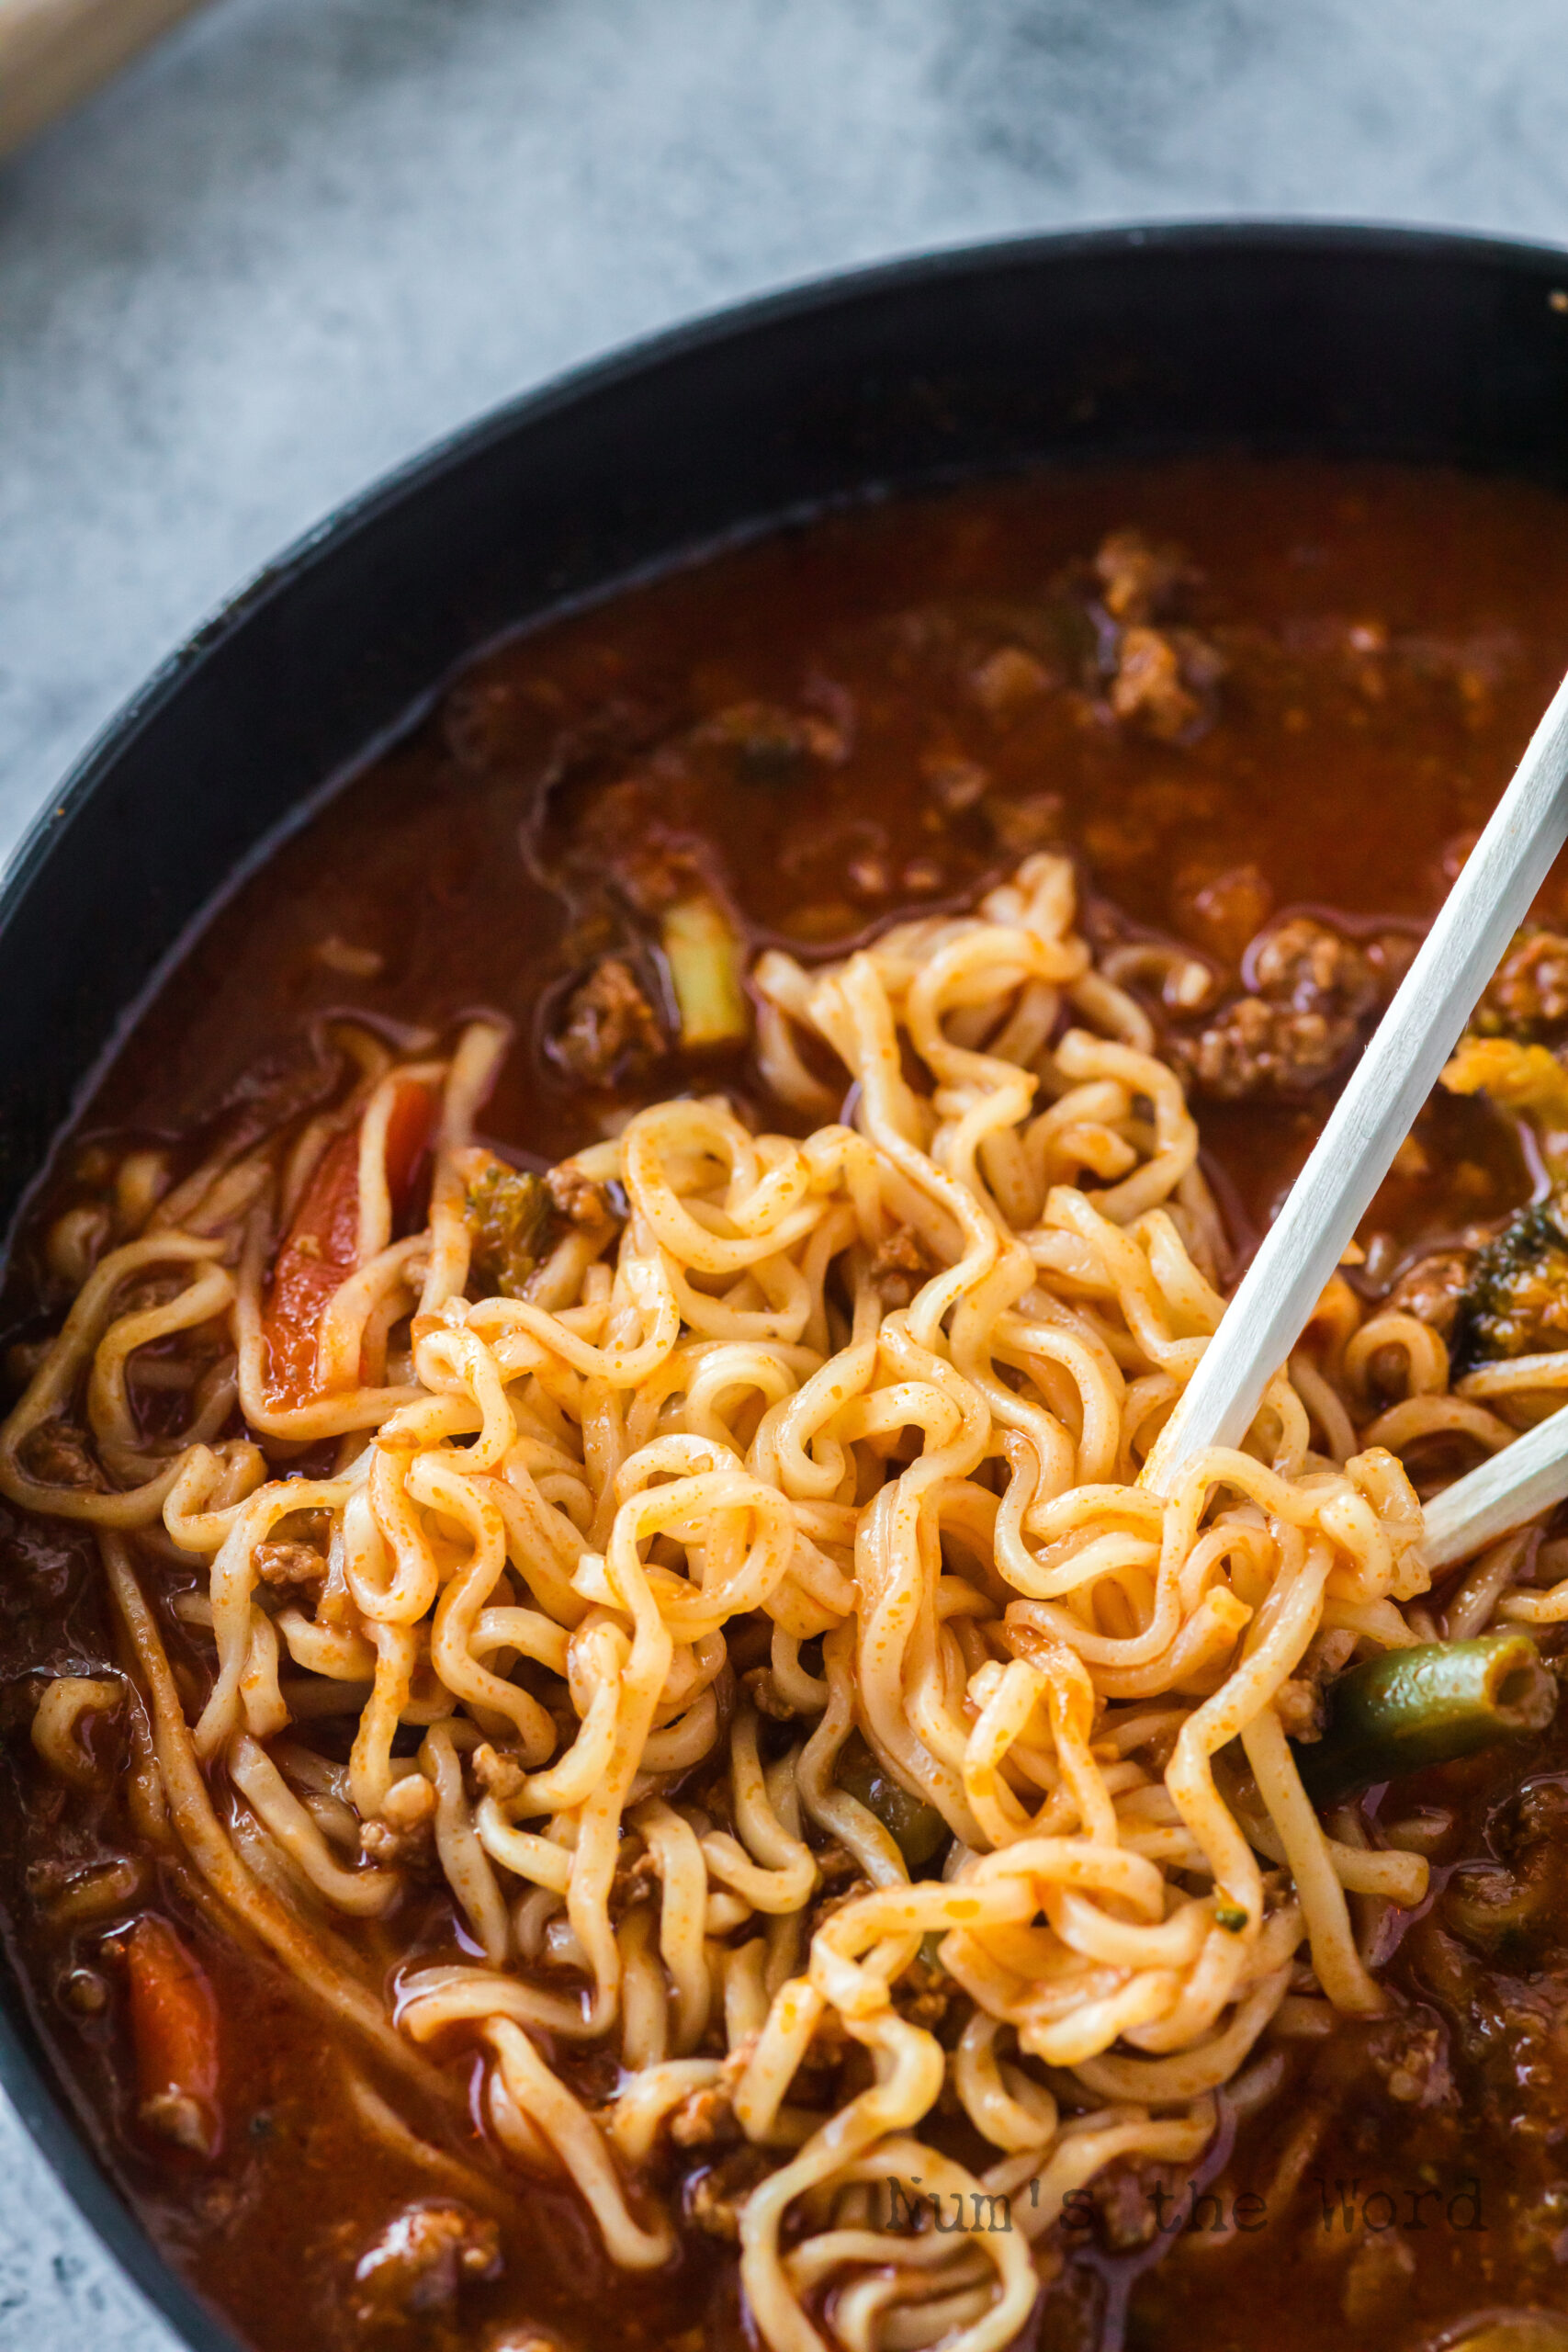 zoomed in image of soup in bowl with chop sticks pulling noodles